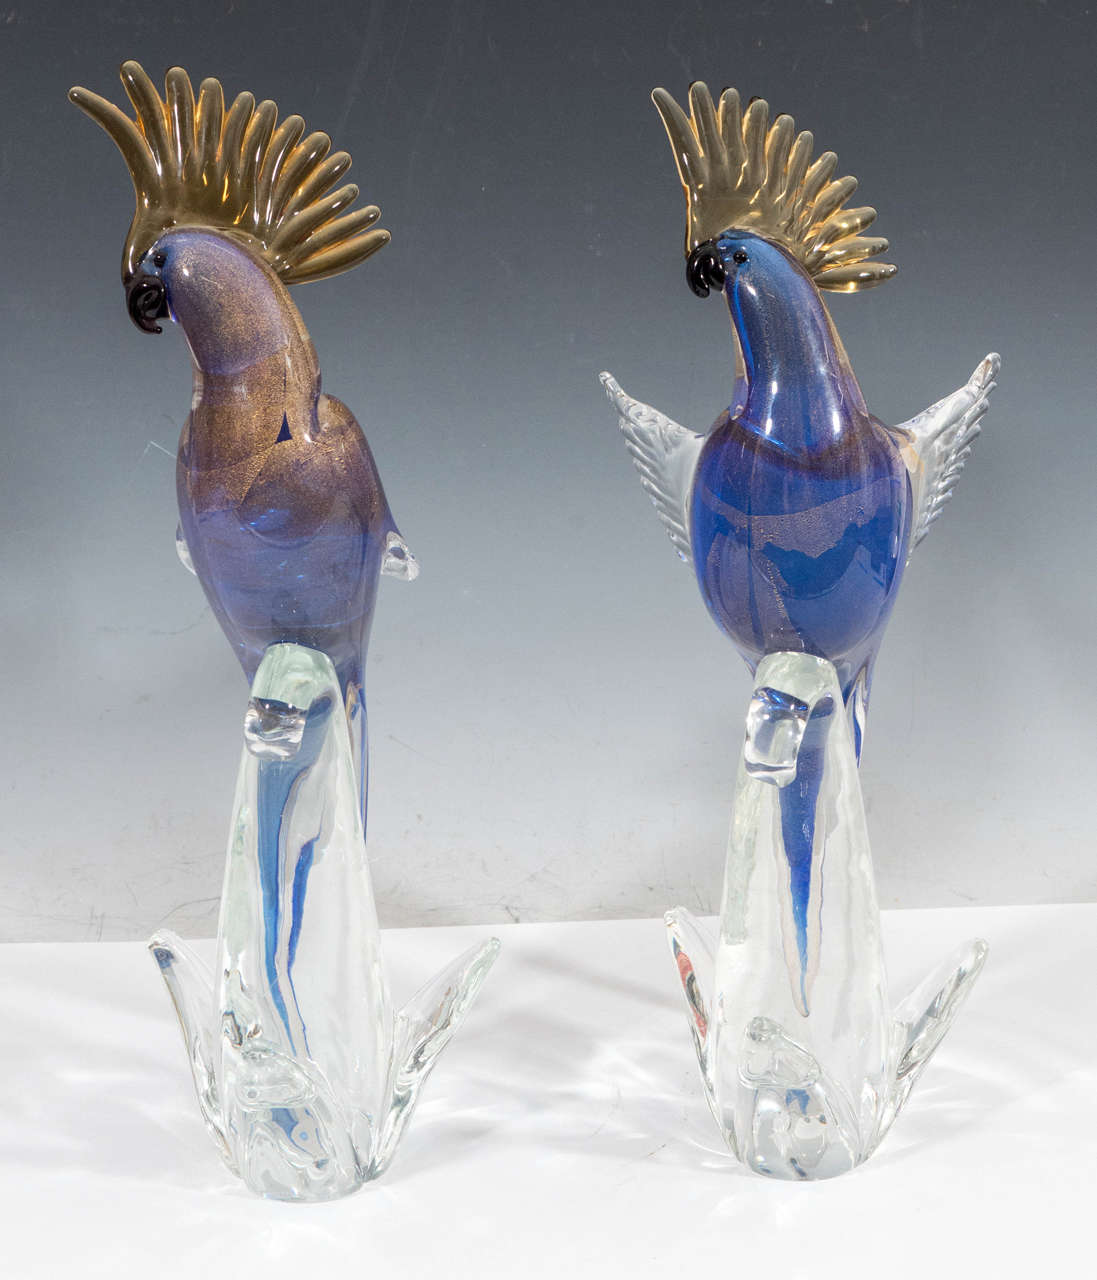 A vintage pair of Murano glass sculptural cockatoo parrots, in indigo with gold inclusions, rendered through 'Sommerso' technique, each perched on transparent curved base, by Archimede Seguso. Both pieces are in good vintage condition, with age